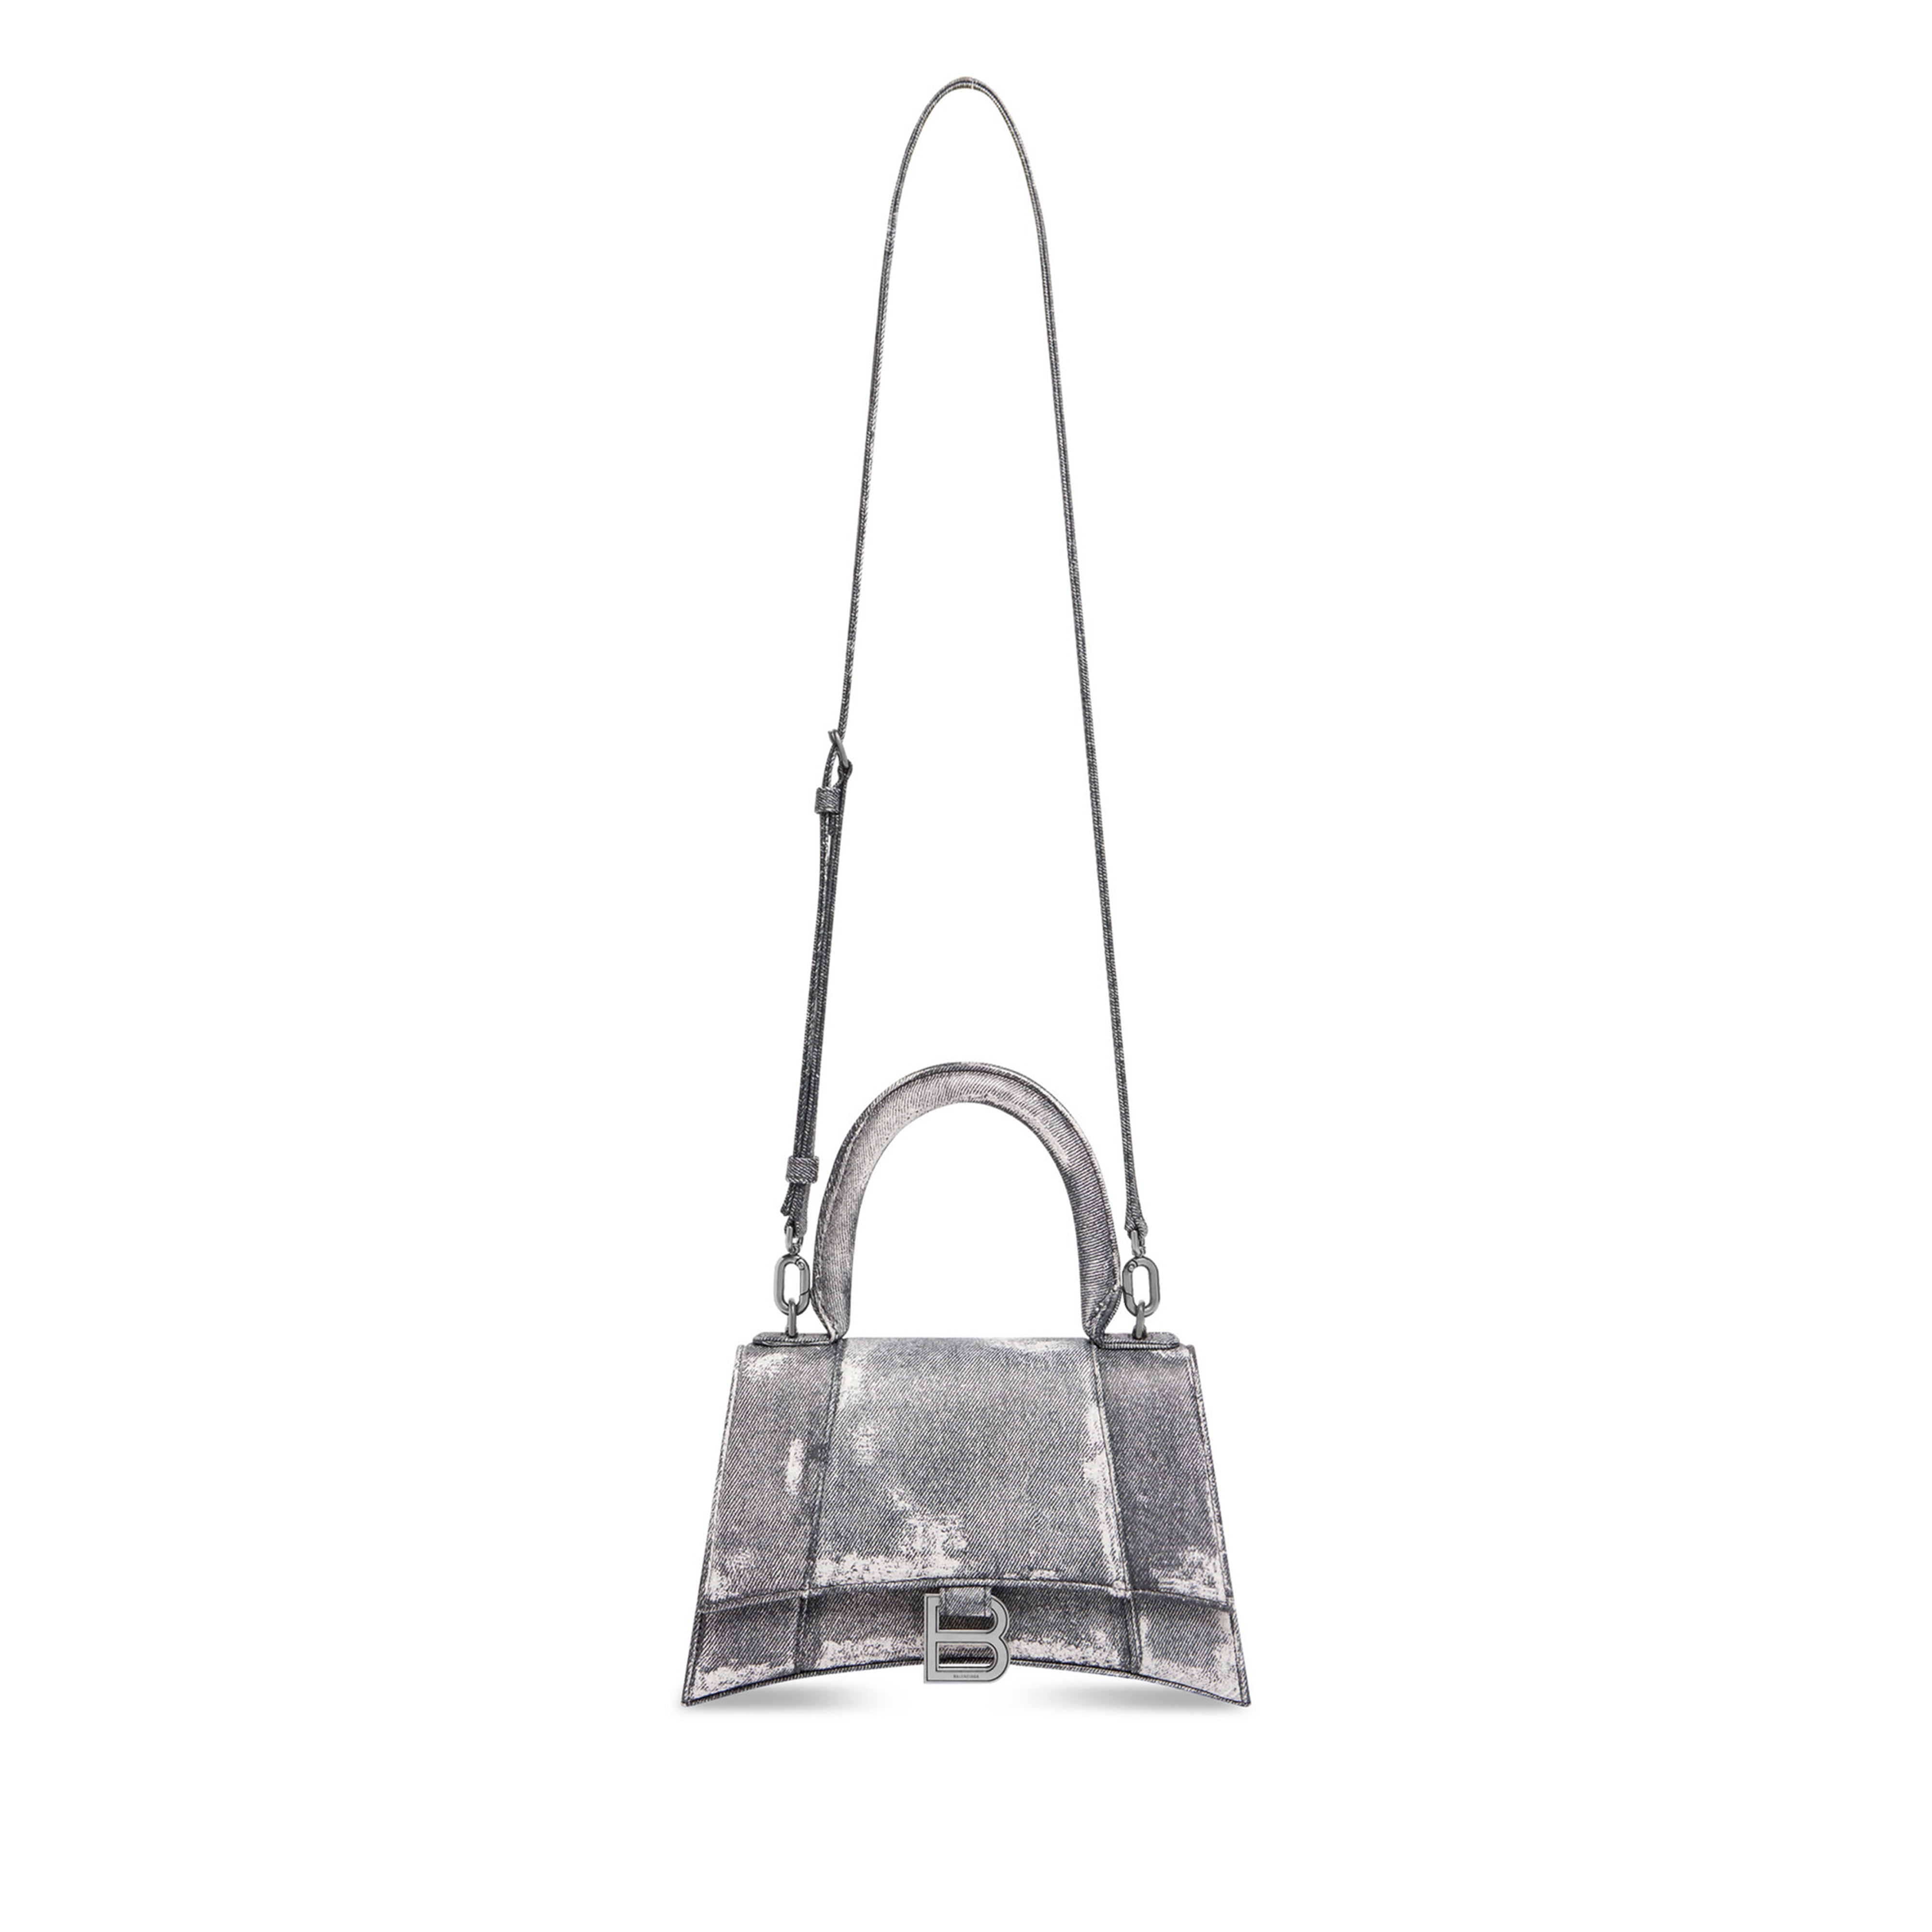 The Contemporary Appeal of the Balenciaga Hourglass Bag – LuxUness